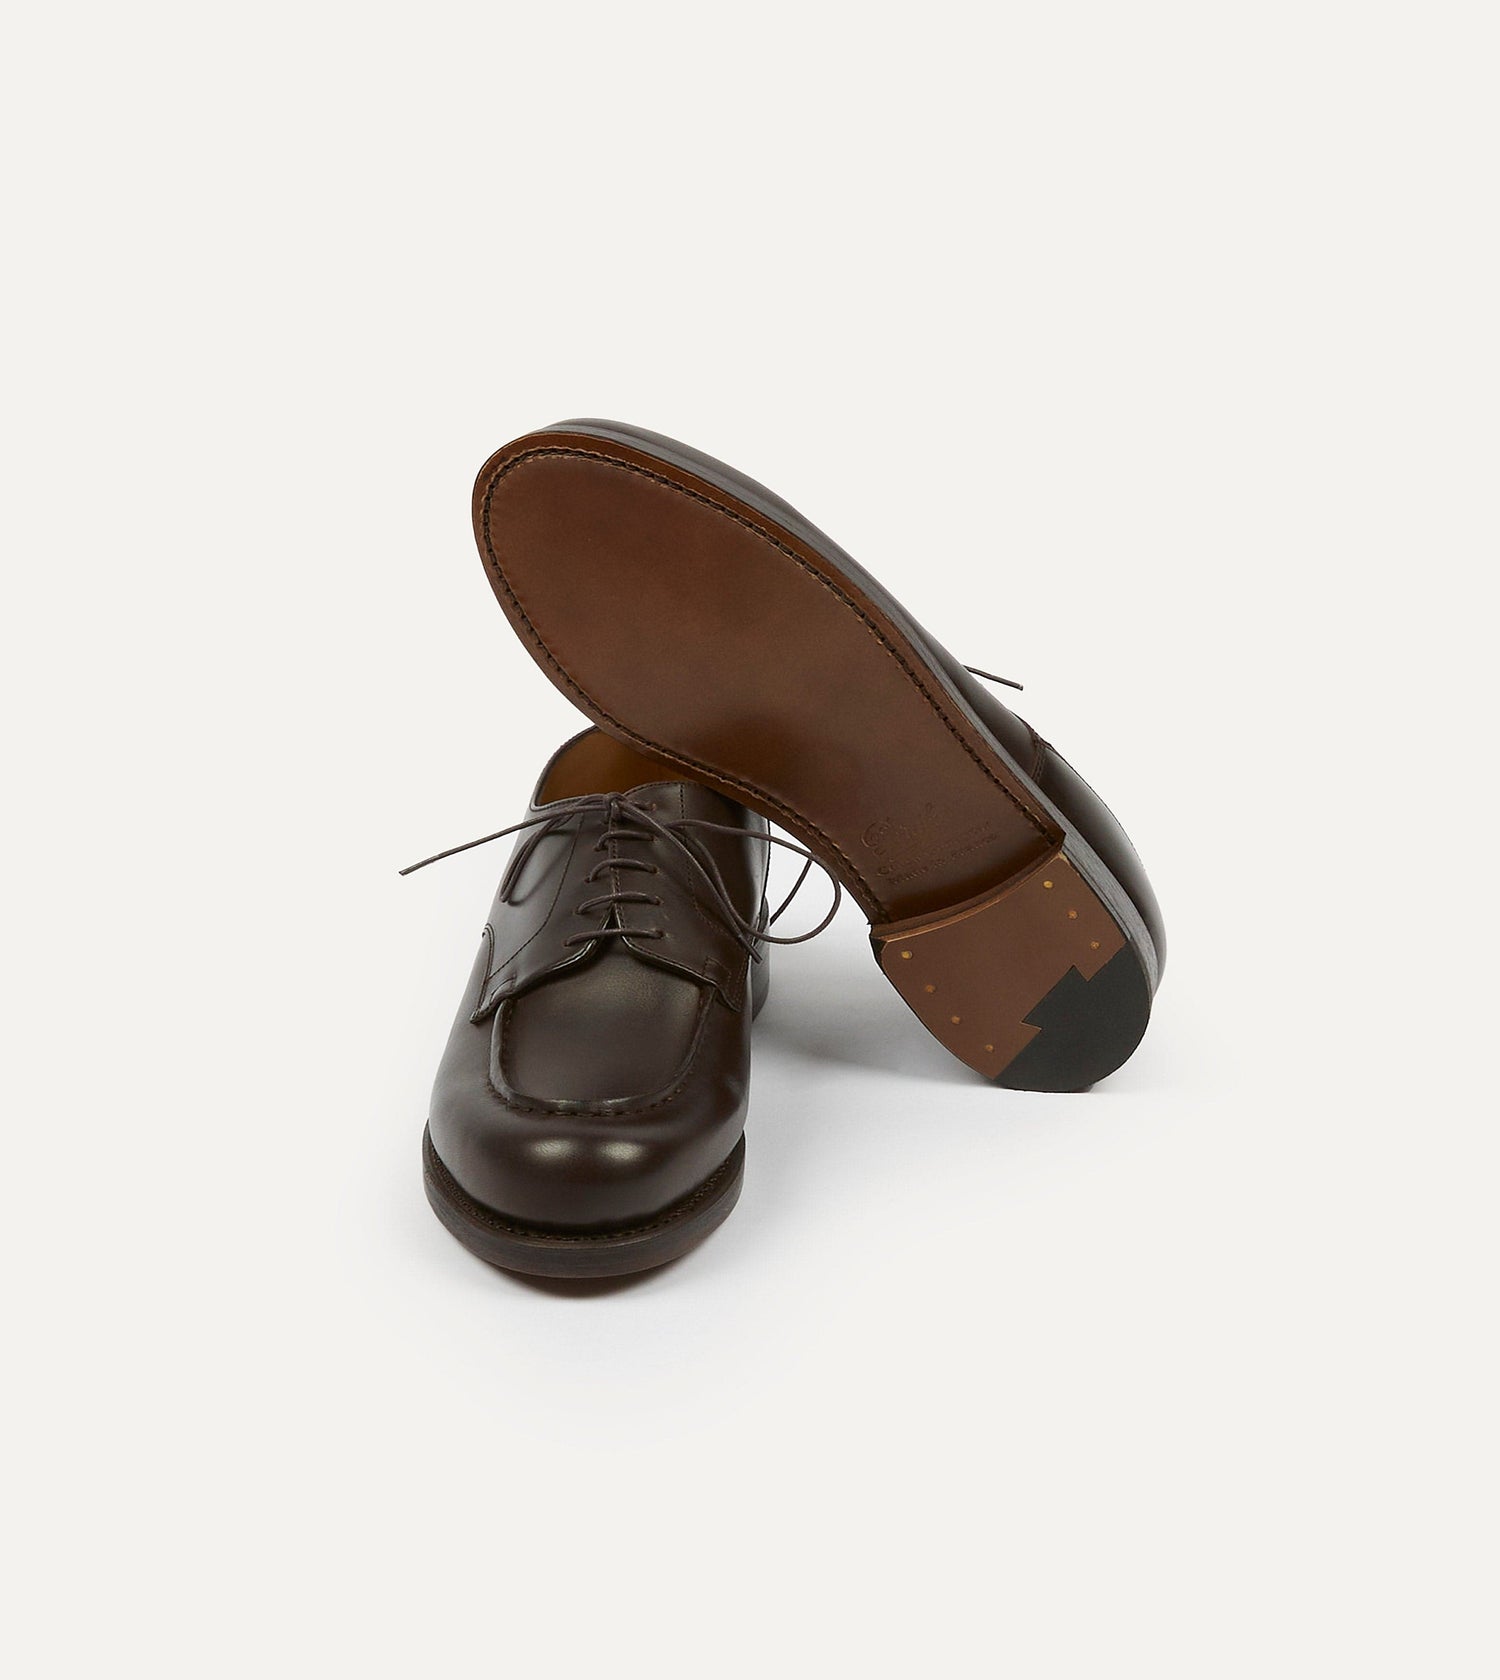 Paraboot Chambord Brown Calf Leather Derby Shoe